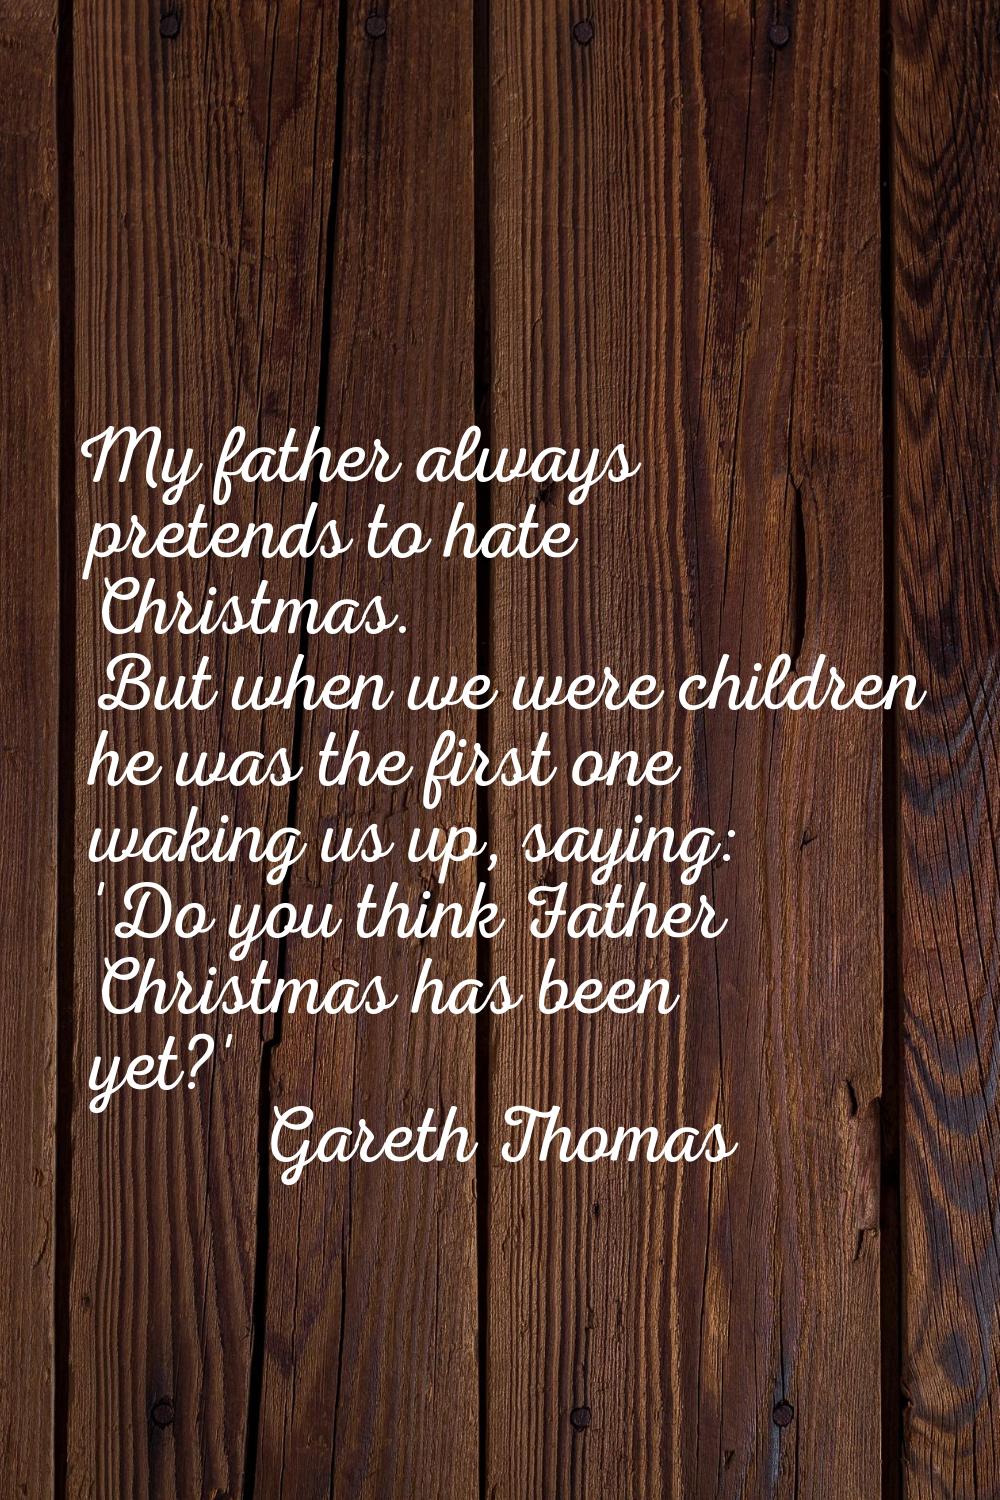 My father always pretends to hate Christmas. But when we were children he was the first one waking 